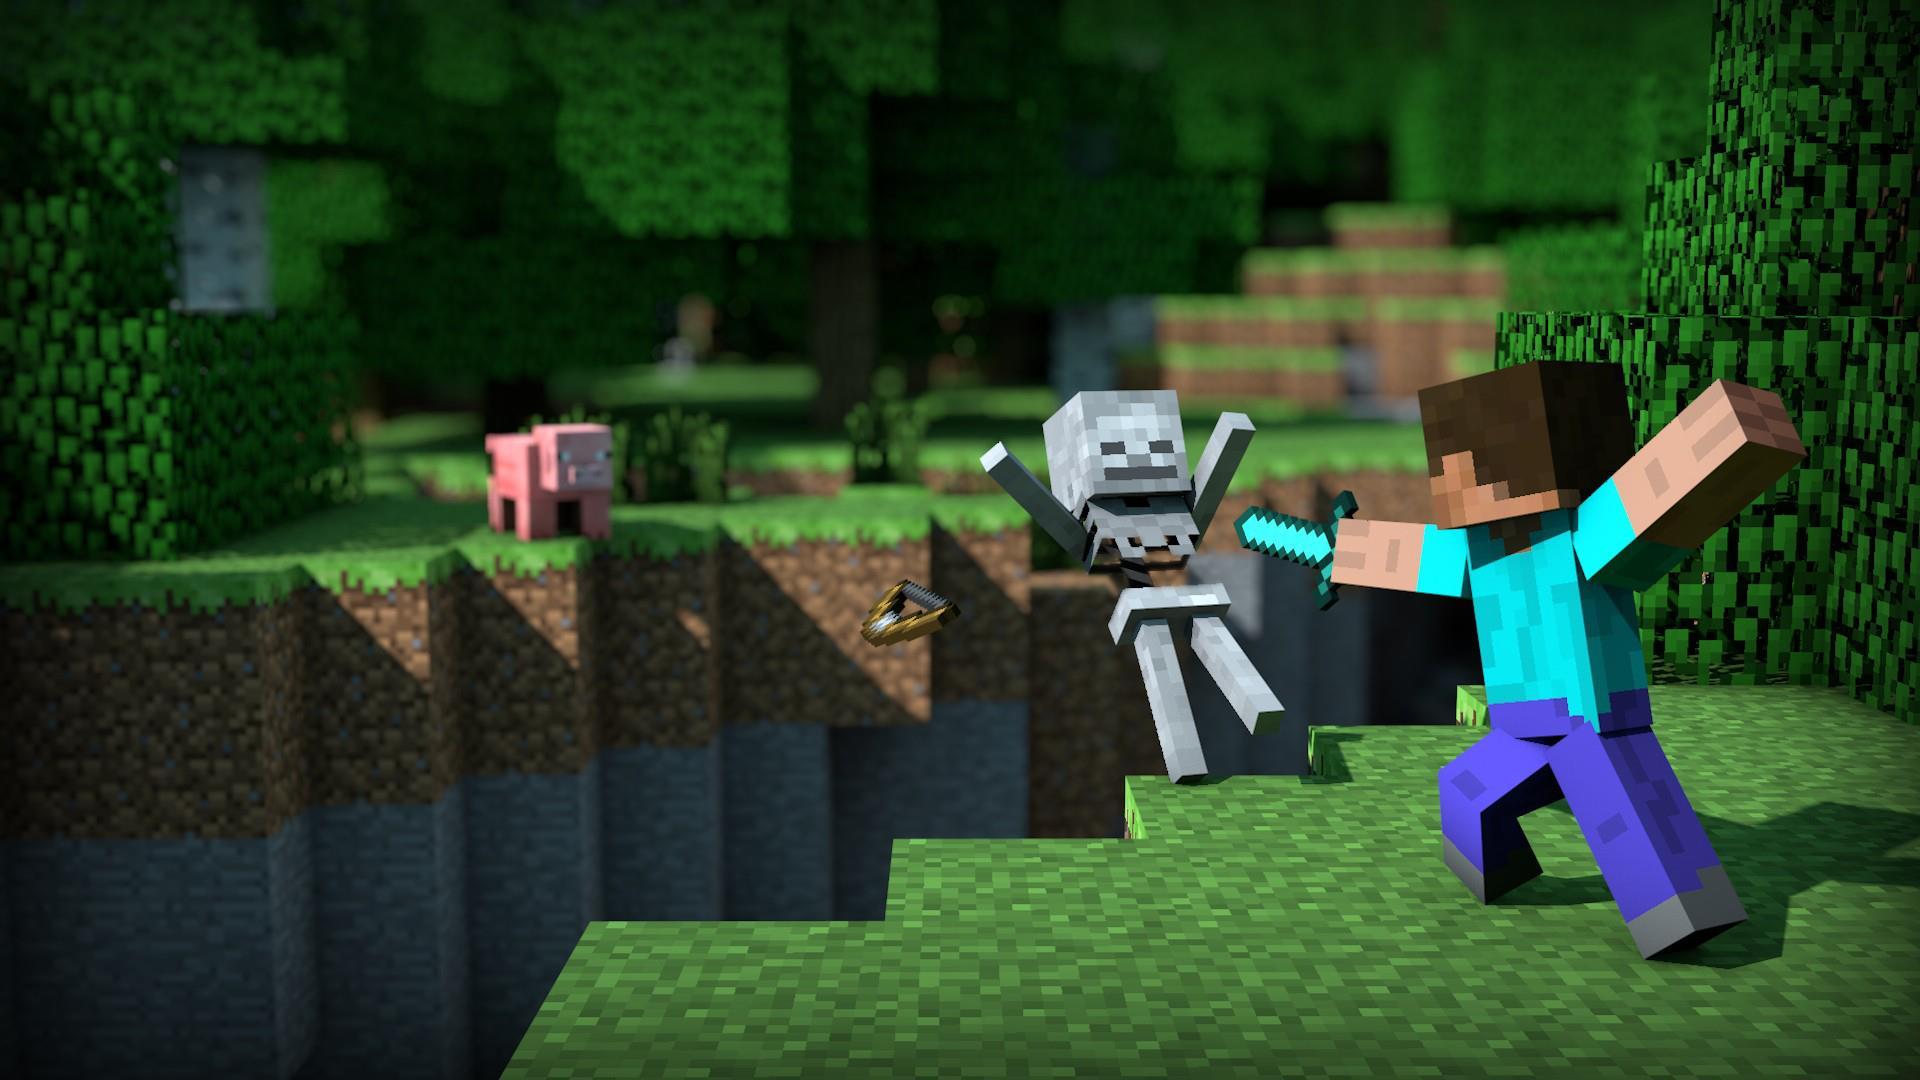 Minecraft Steve is fighting a skeleton in the forest - Minecraft